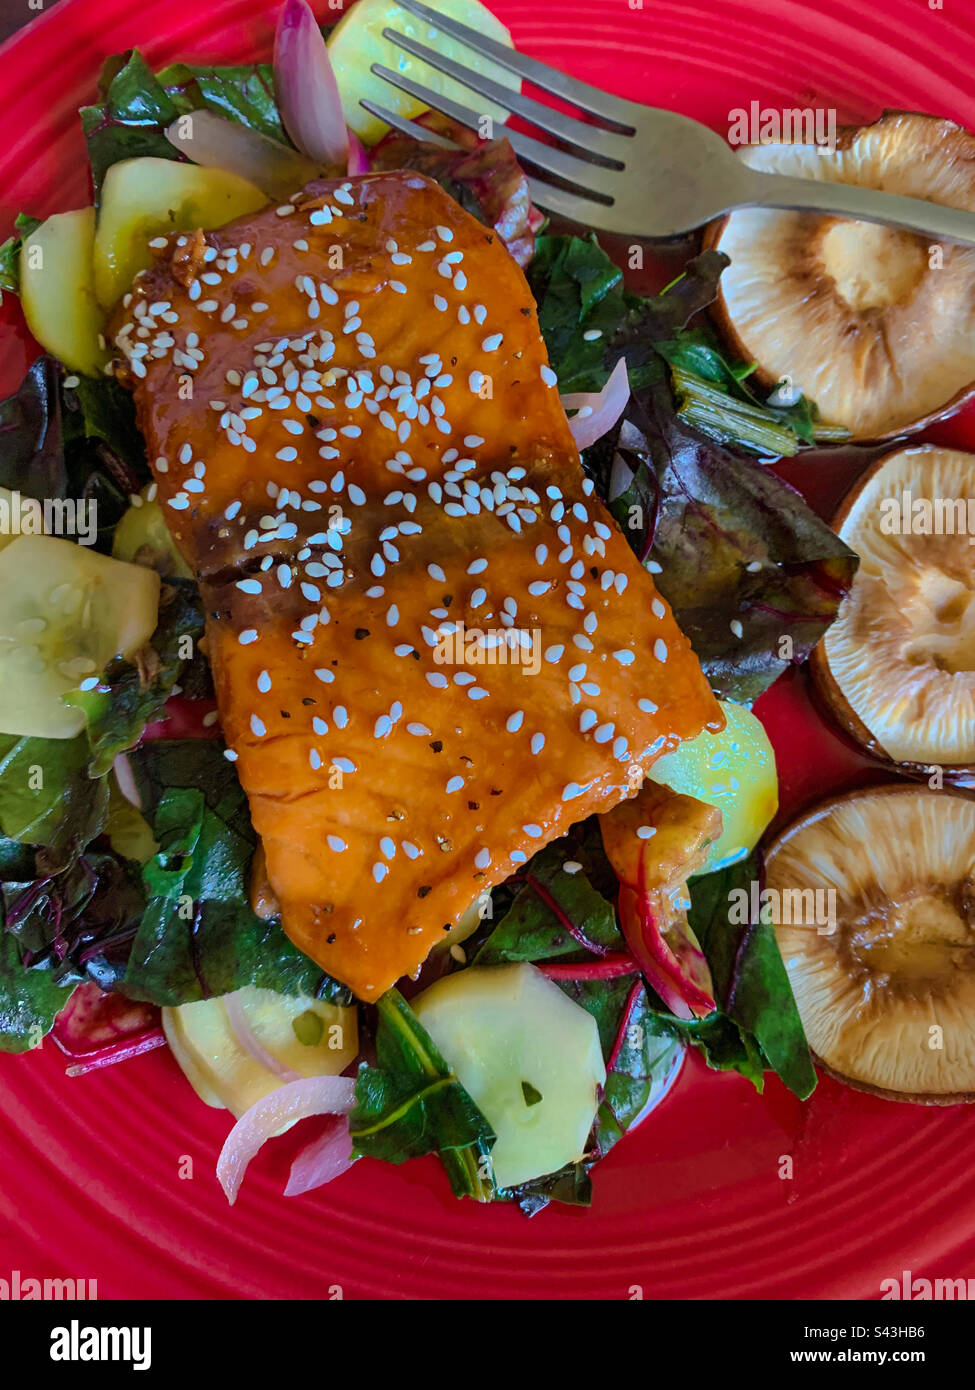 A delicious, healthy, colorful, plated meal with salmon coated in sesame seeds & soy sauce, garnished with butter shiitake mushrooms and various homegrown greens and vegetables. Stock Photo